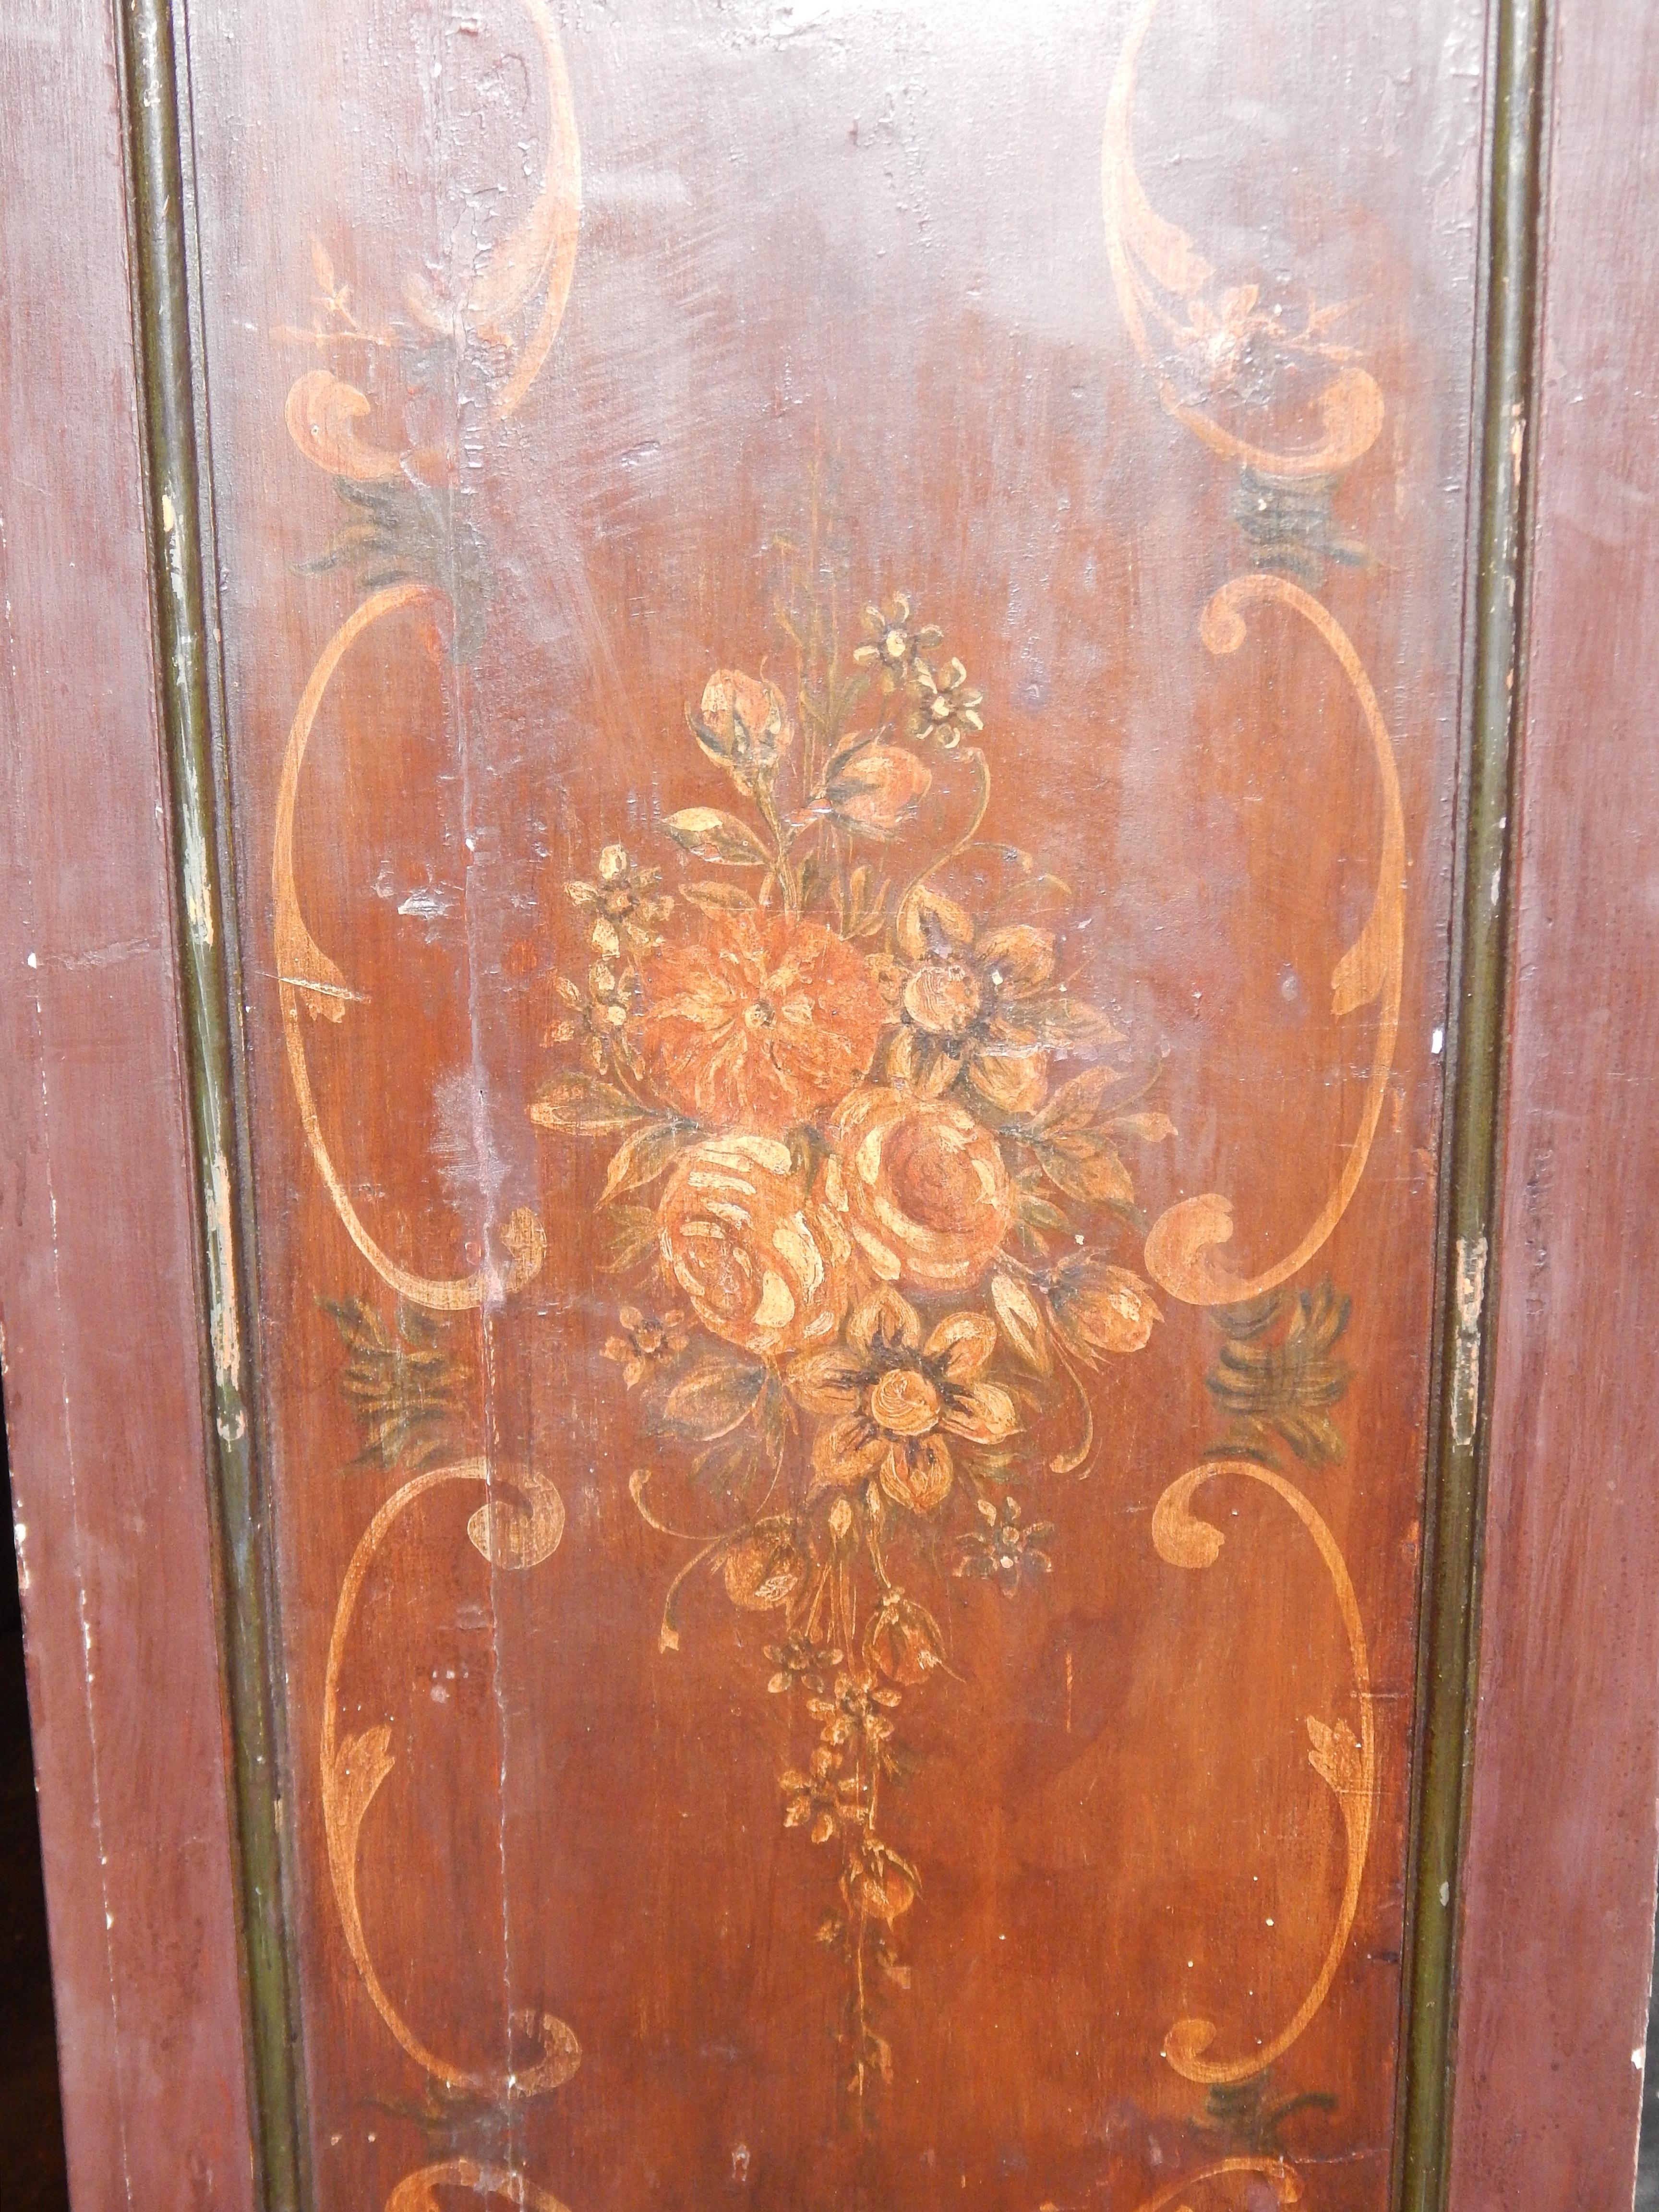 19th Century Lacquered Wardrobe with Floral Motifs In Fair Condition For Sale In Badia Polesine, Rovigo